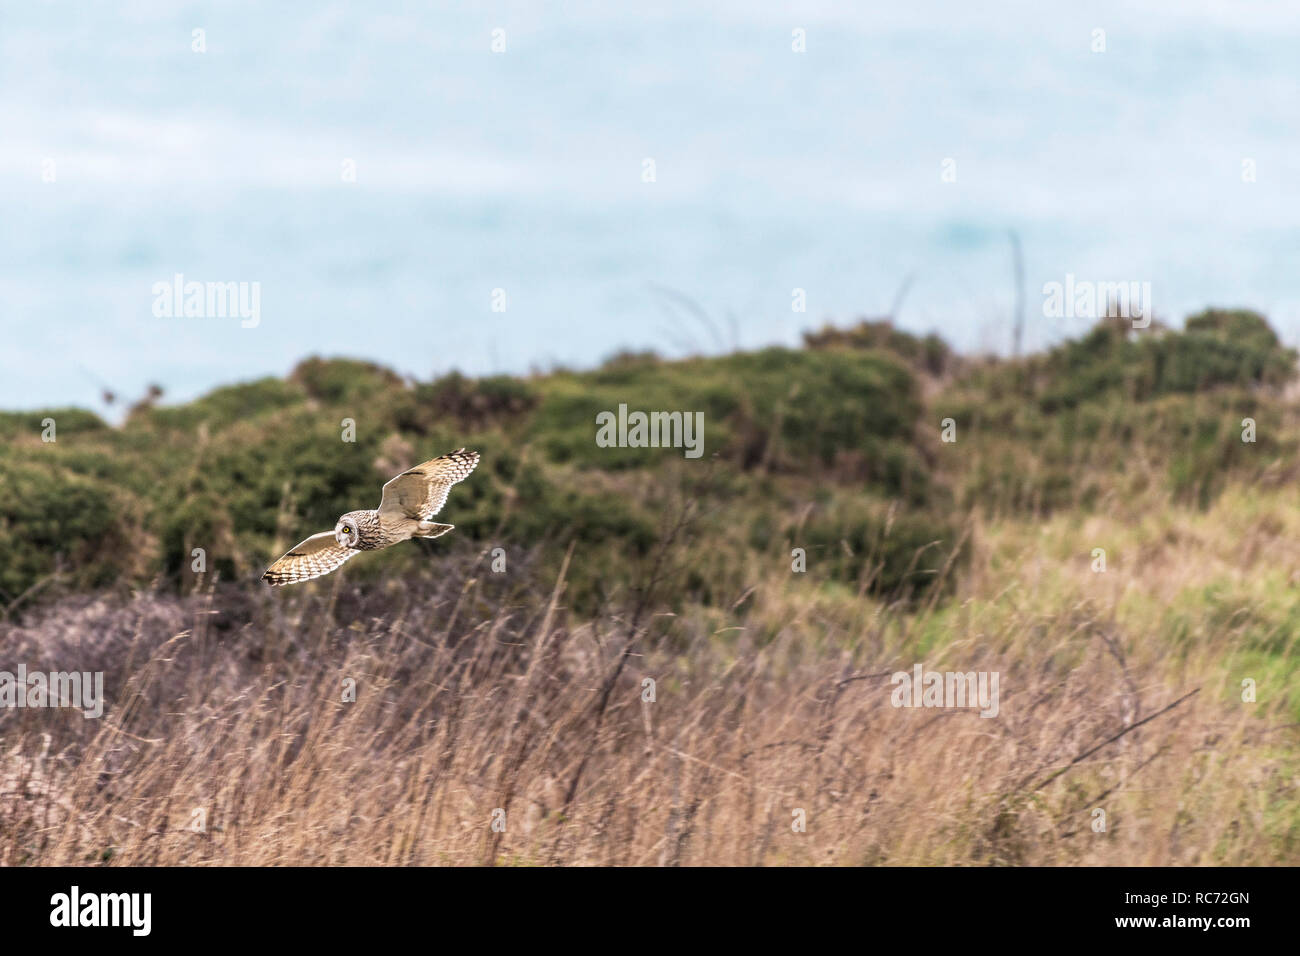 A Short Eared Owl Asio flammeus in flight Nature on Pentire Point East in Newquay Cornwall UK. Stock Photo